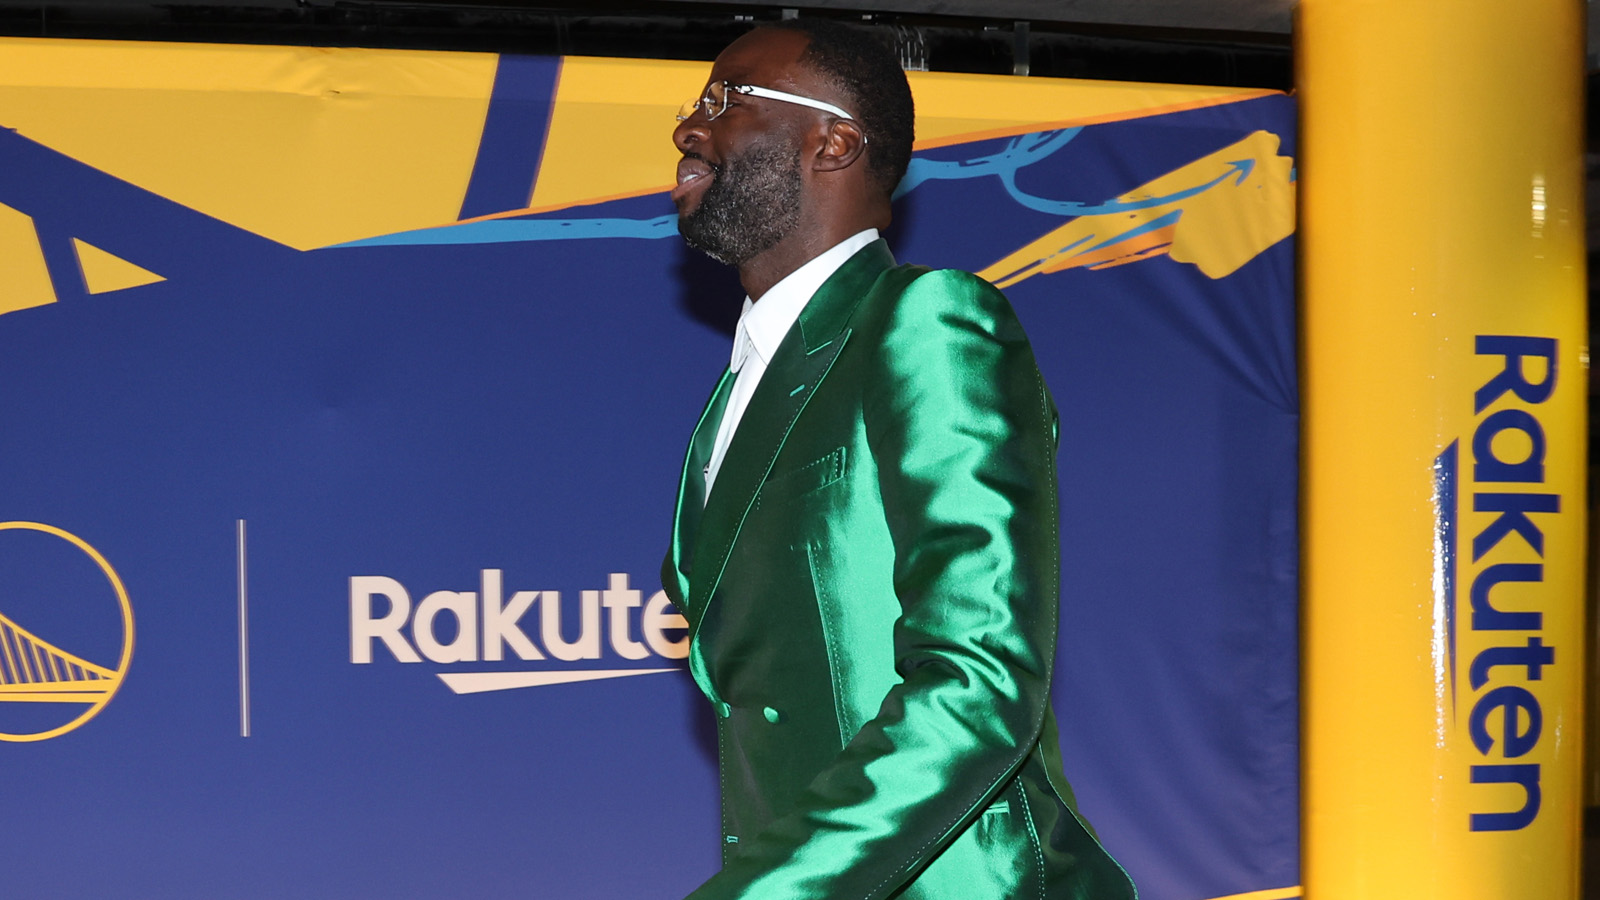 draymond green outfit